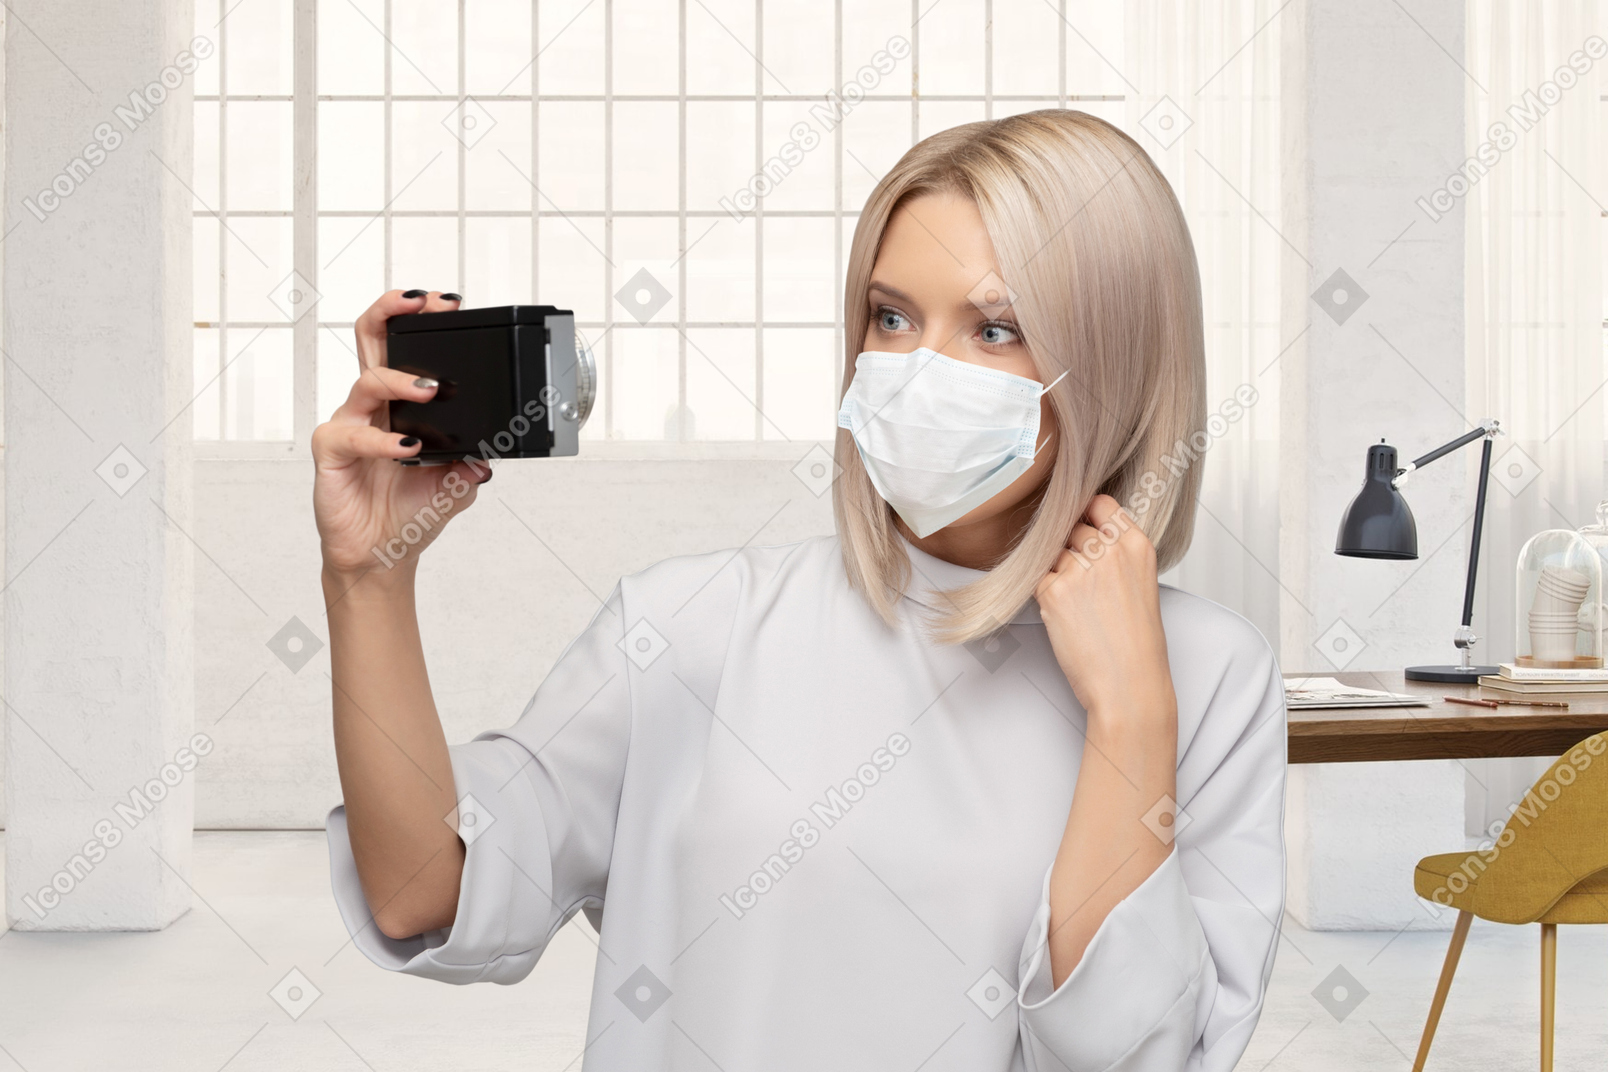 A woman wearing a face mask taking selfie on camera